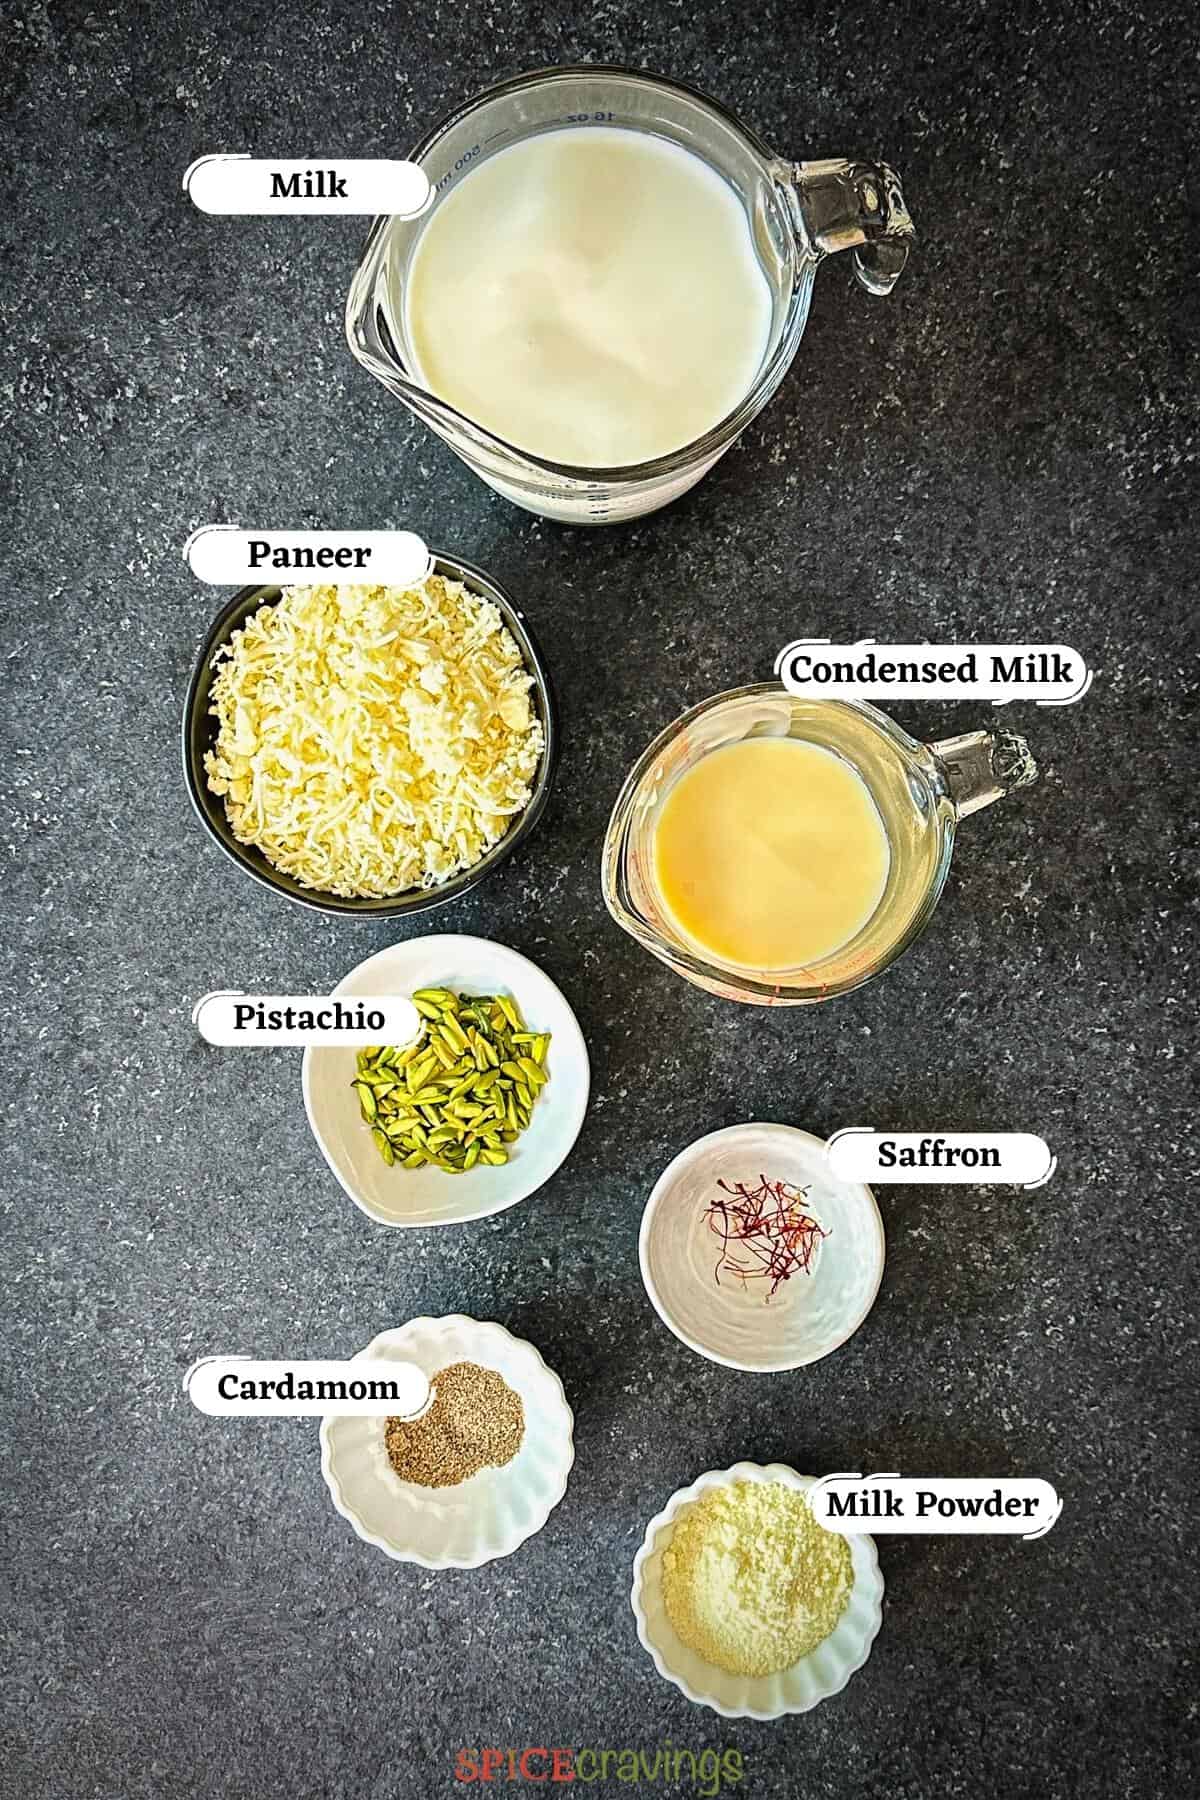 milk, paneer, sugar among other ingredients for making rabdi spread out on grey board